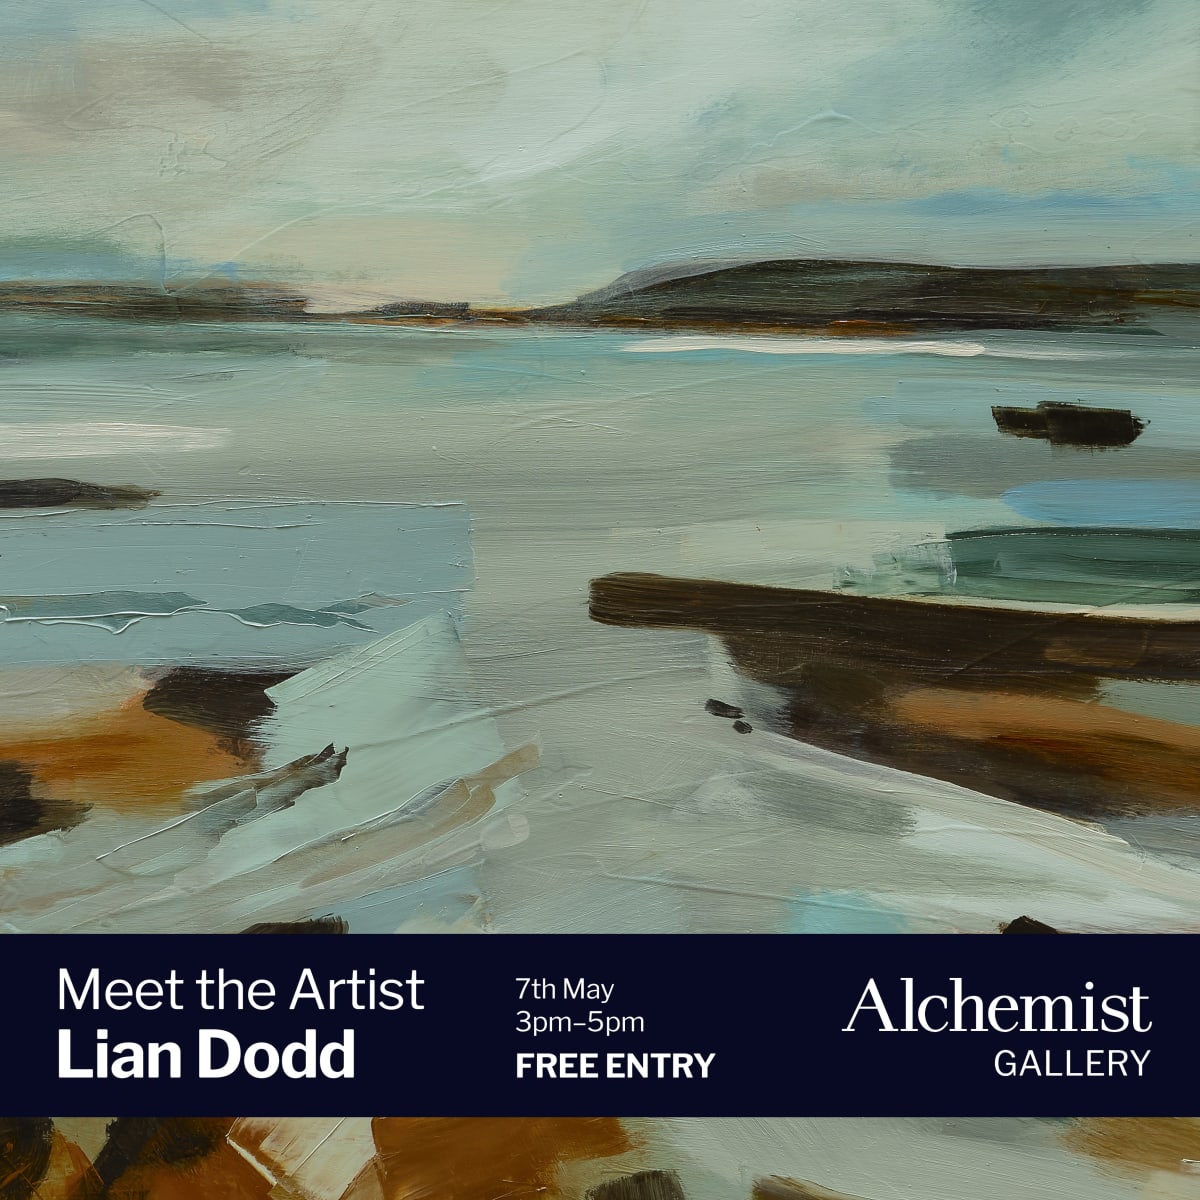 exhibition poster for Capturing the Firth, Lian Dodd, featuring Across The Way by the artist